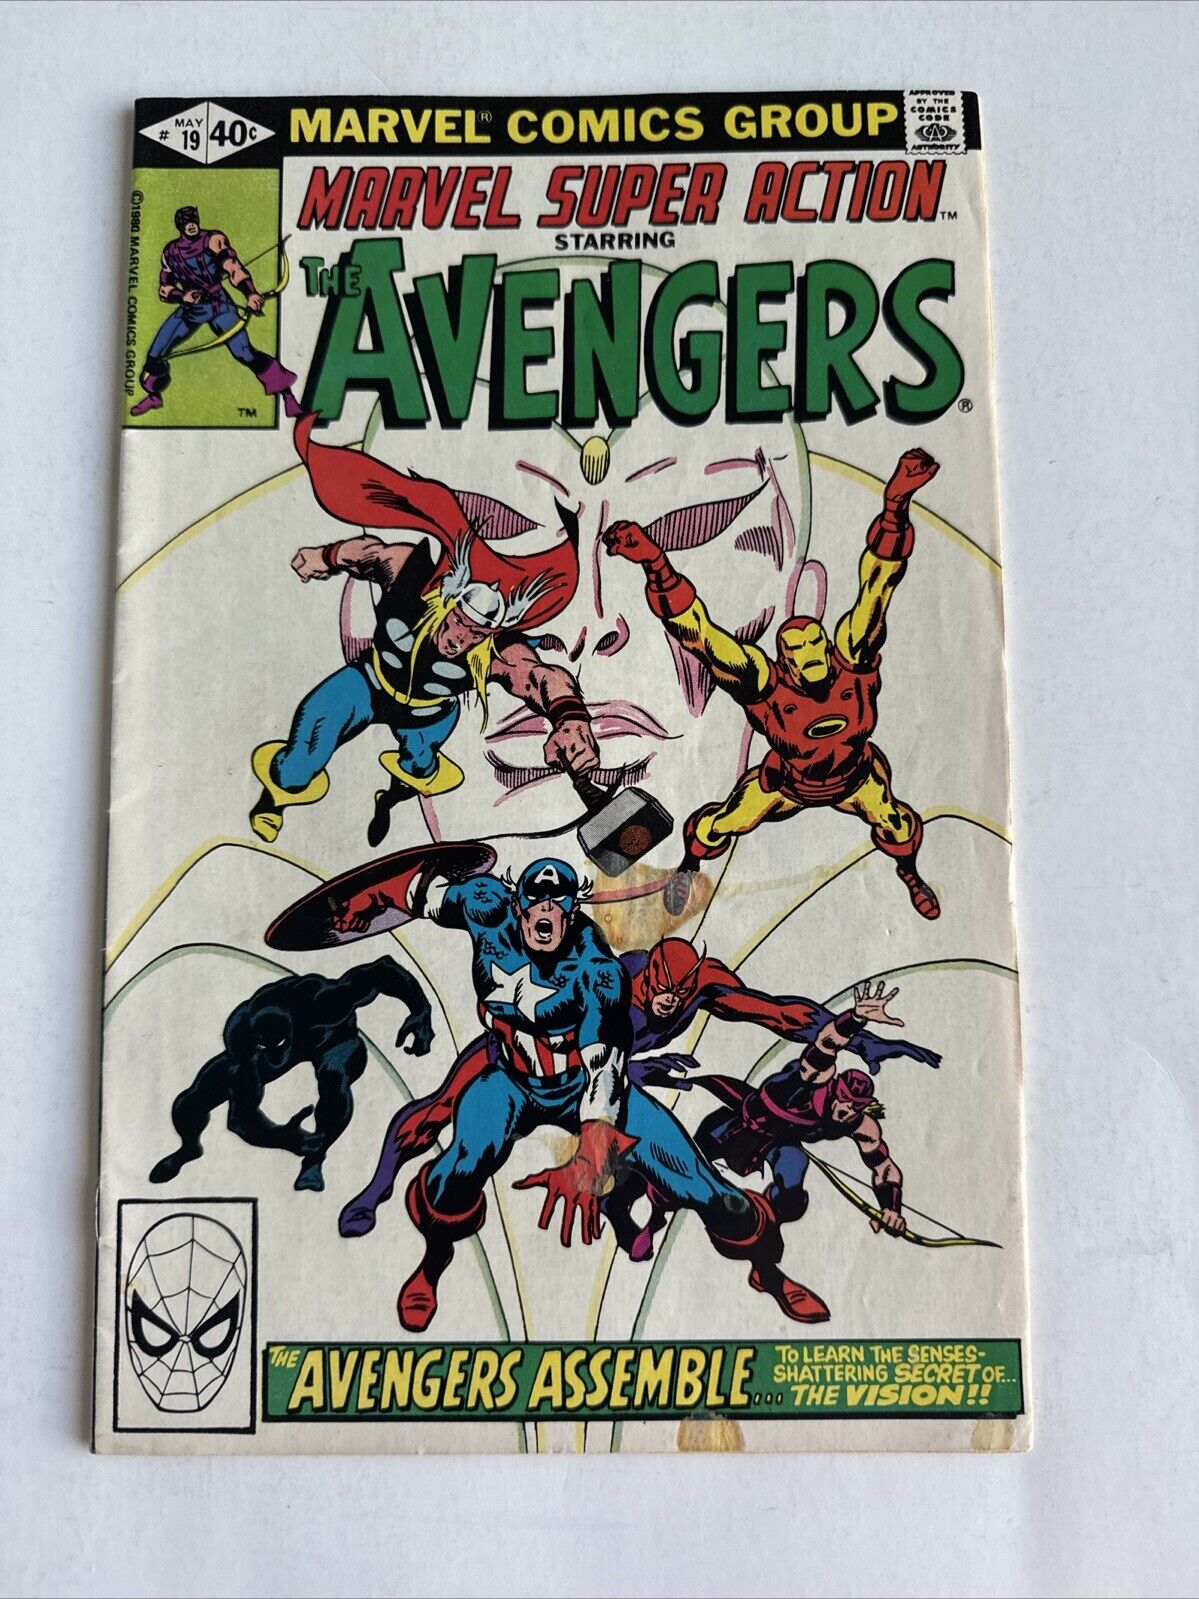 Marvel Super Action Starring The Avengers #19 May 1980